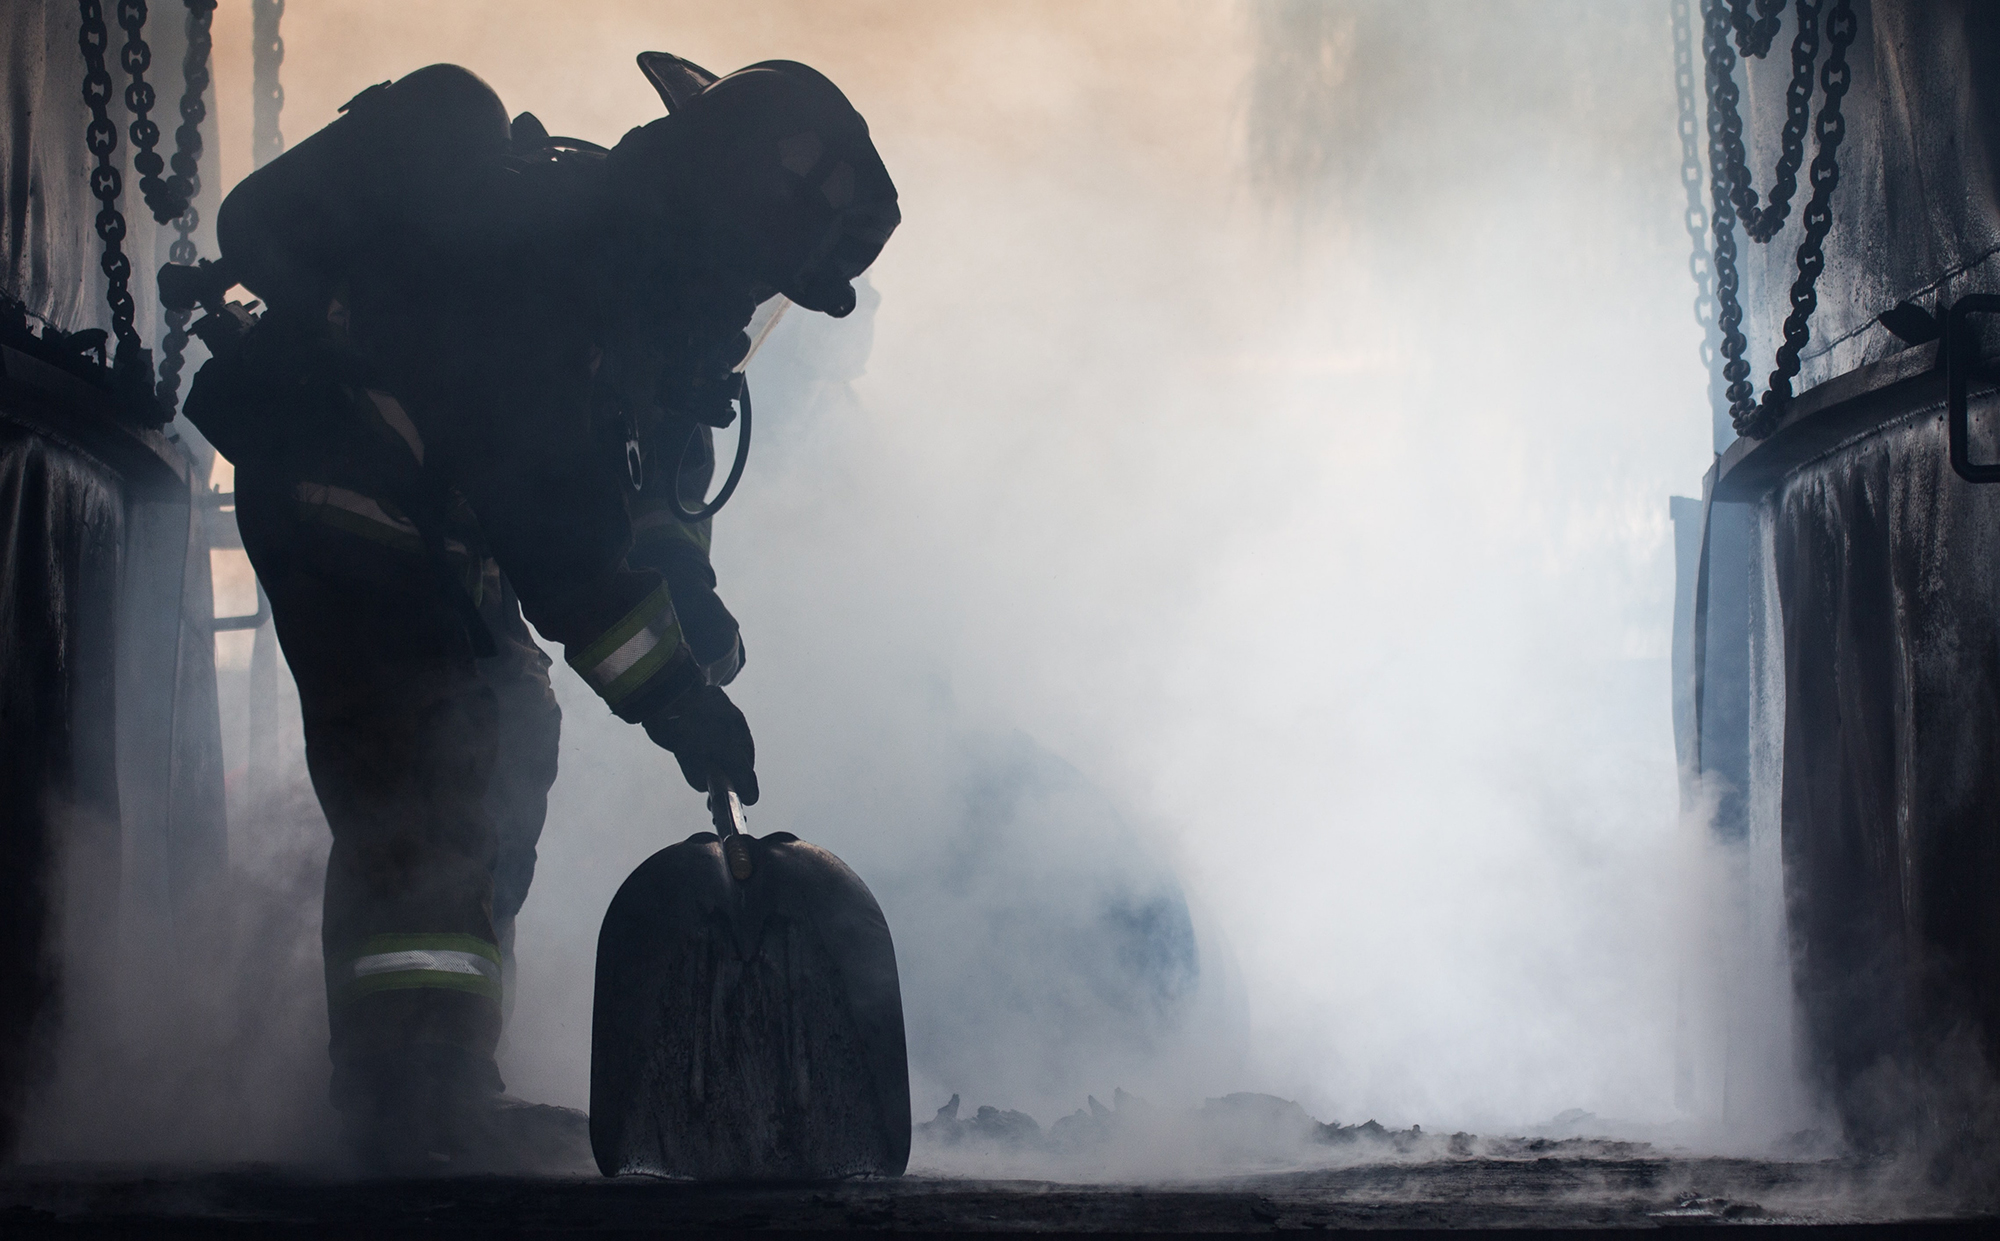 Fireman working in the steam and smoke of a fire representing the unique stressors first responders face. Therapy for First Responders in Ohio is here to help process these feelings.